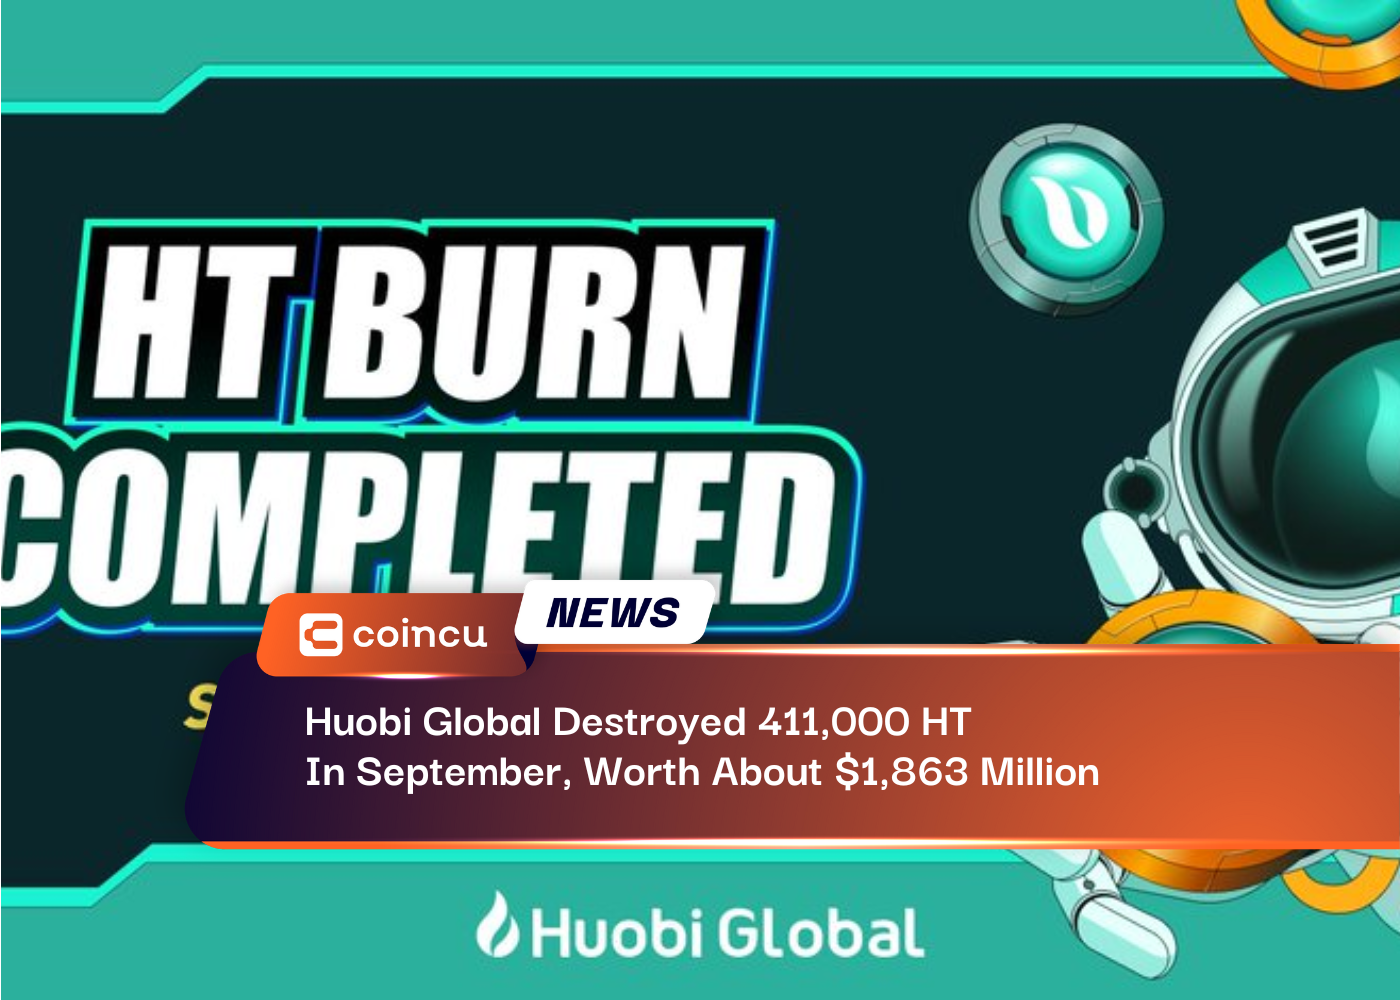 Huobi Global Destroyed 411,000 HT In September, Worth About $1,863 Million